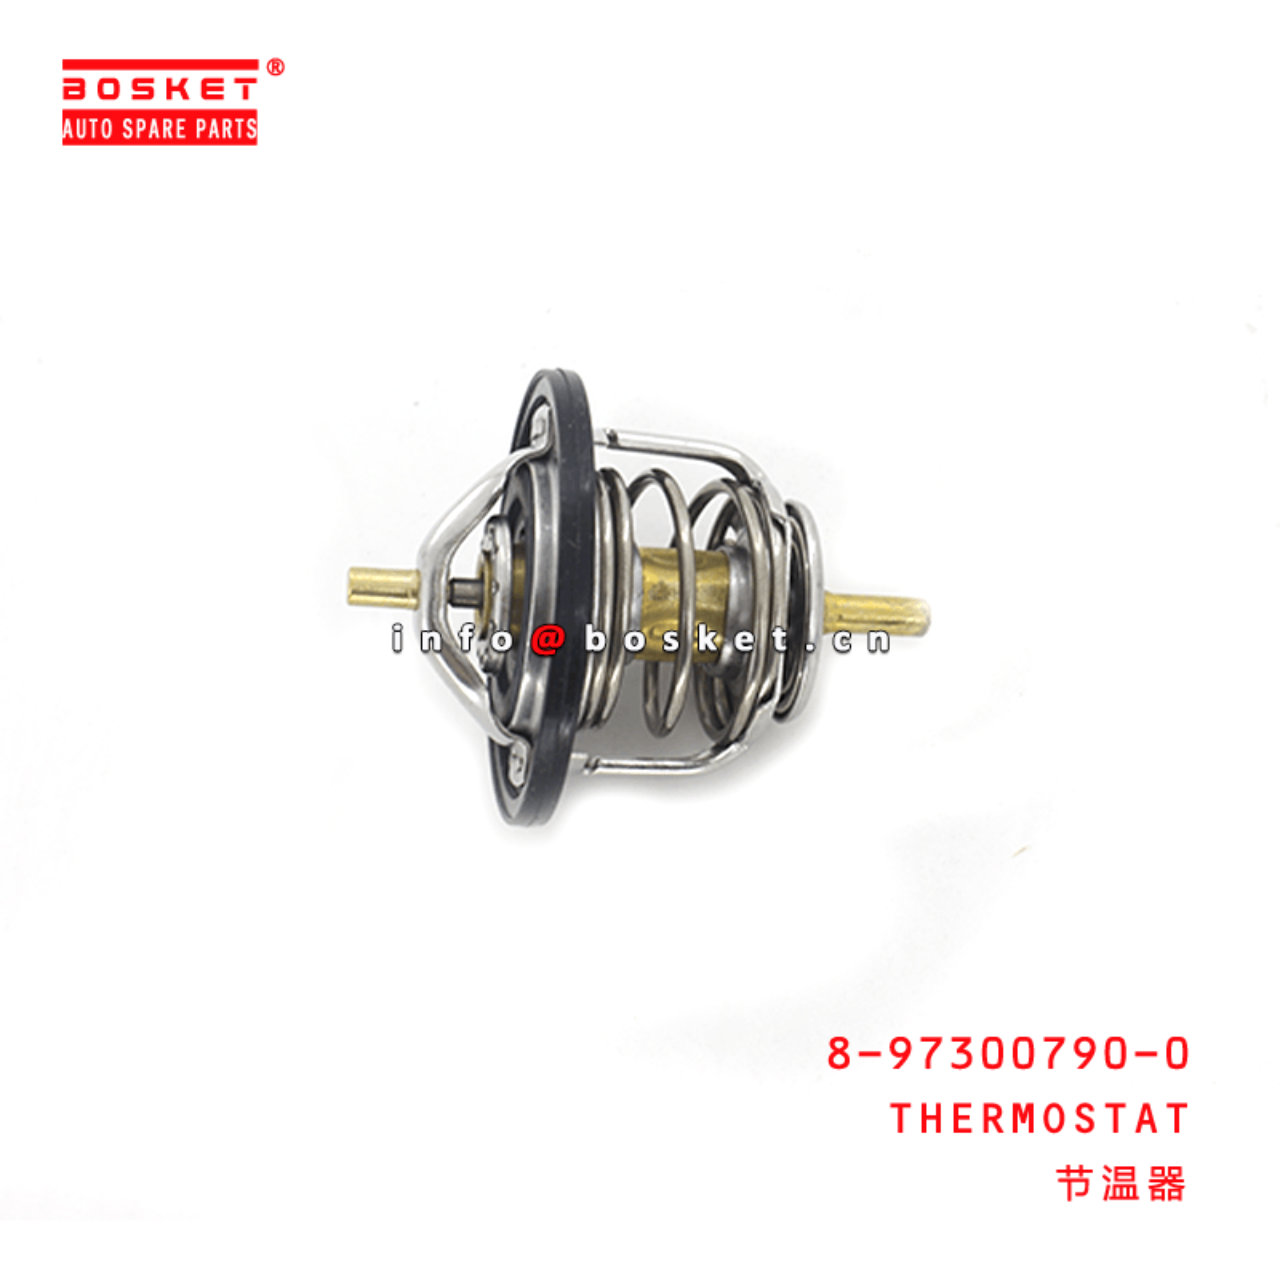 8-97300790-0 Thermostat 8973007900 Suitable for ISUZU NQR 4HF1 4HK1